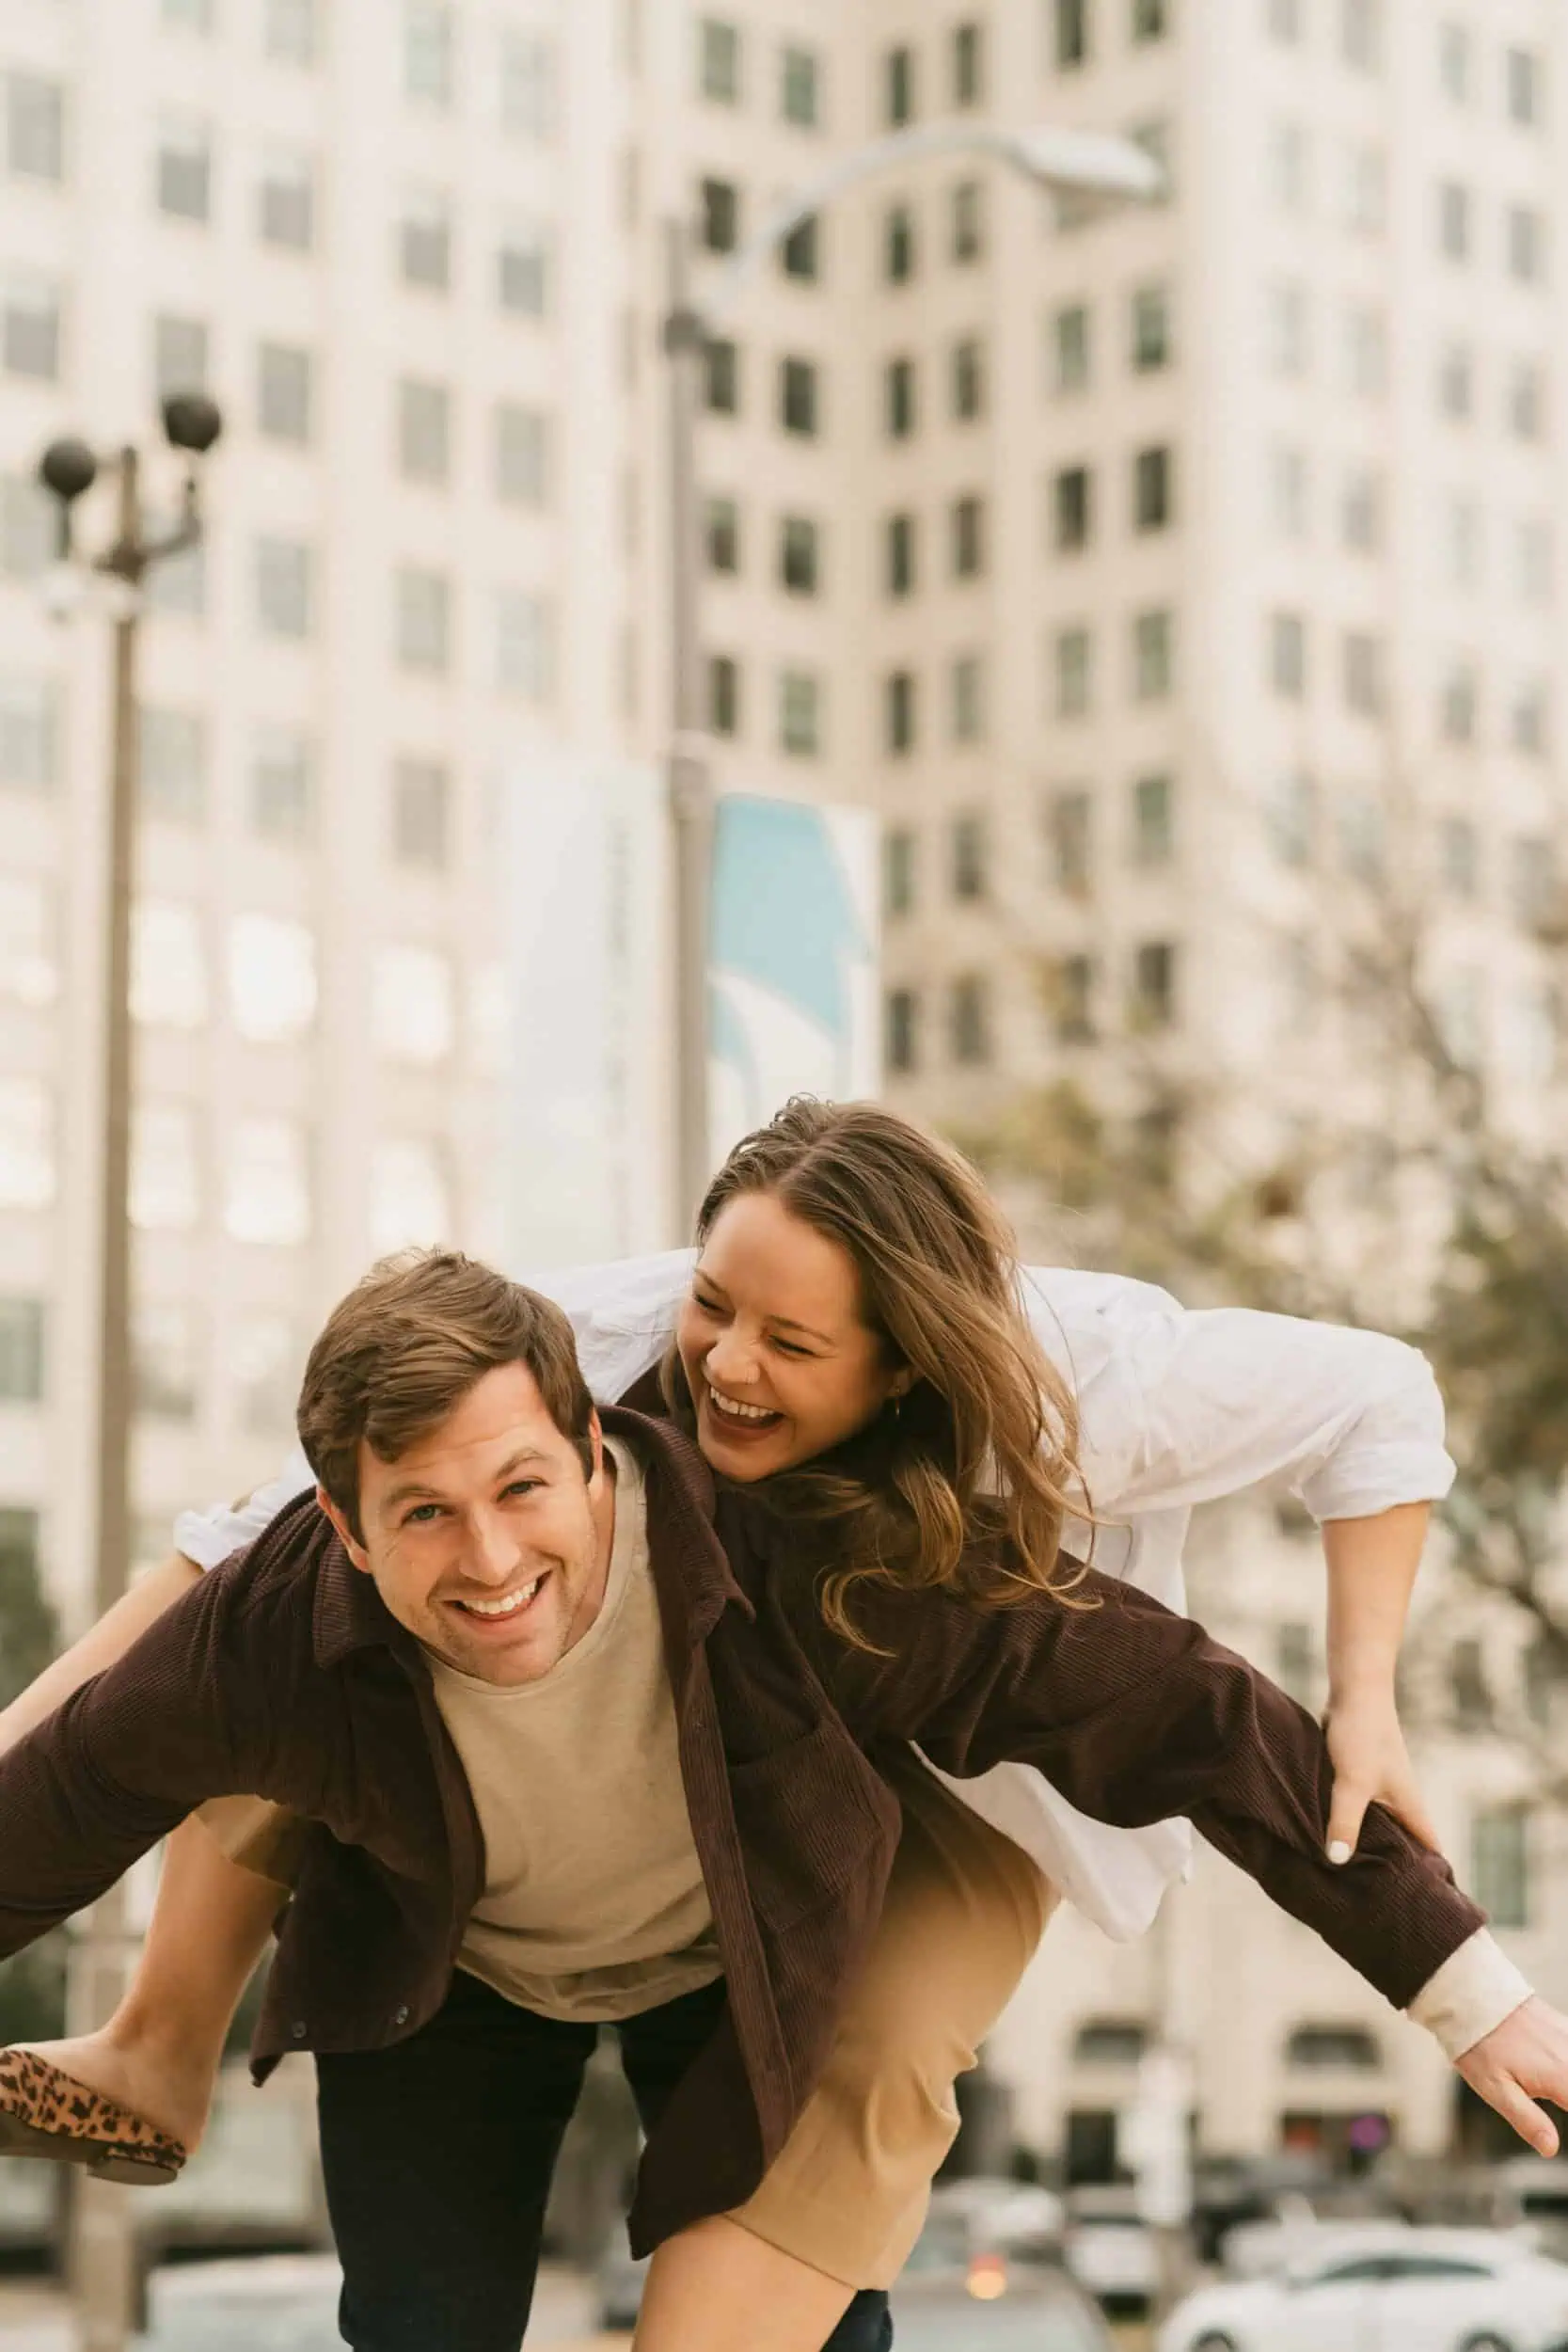 A couple laughing in a piggyback ride pose in downtown St. Louis, Missouri with an urban, filmy aesthetic.